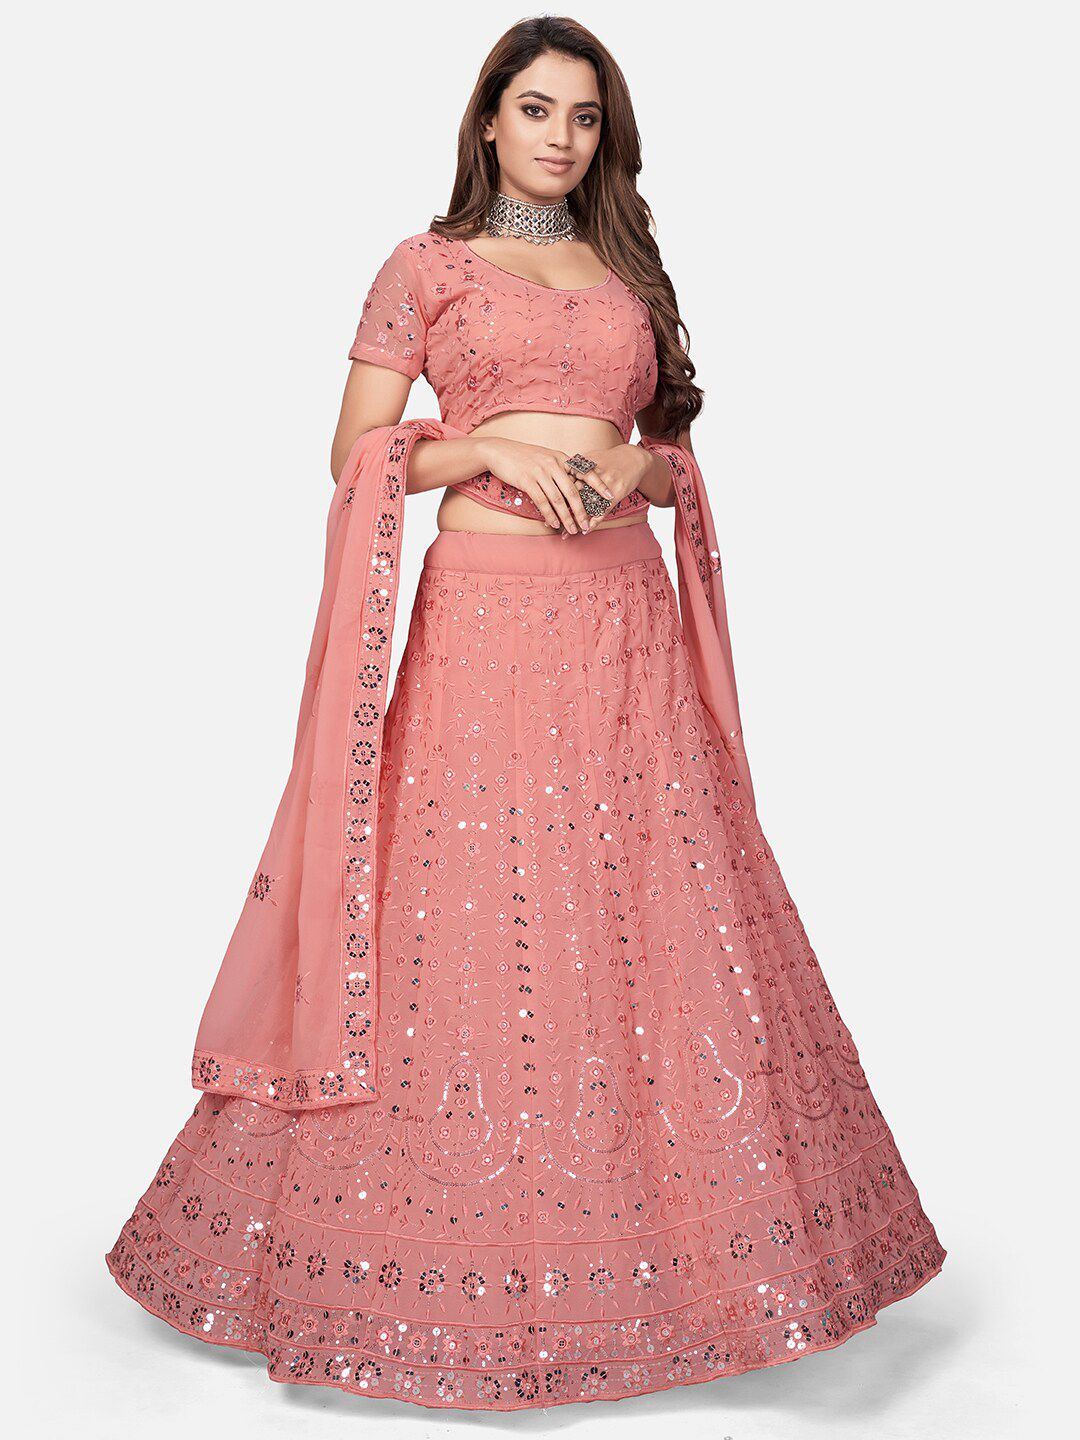 WHITE FIRE Women Pink Embroidered Beads and Stones Semi-Stitched Lehenga Choli & Dupatta Price in India